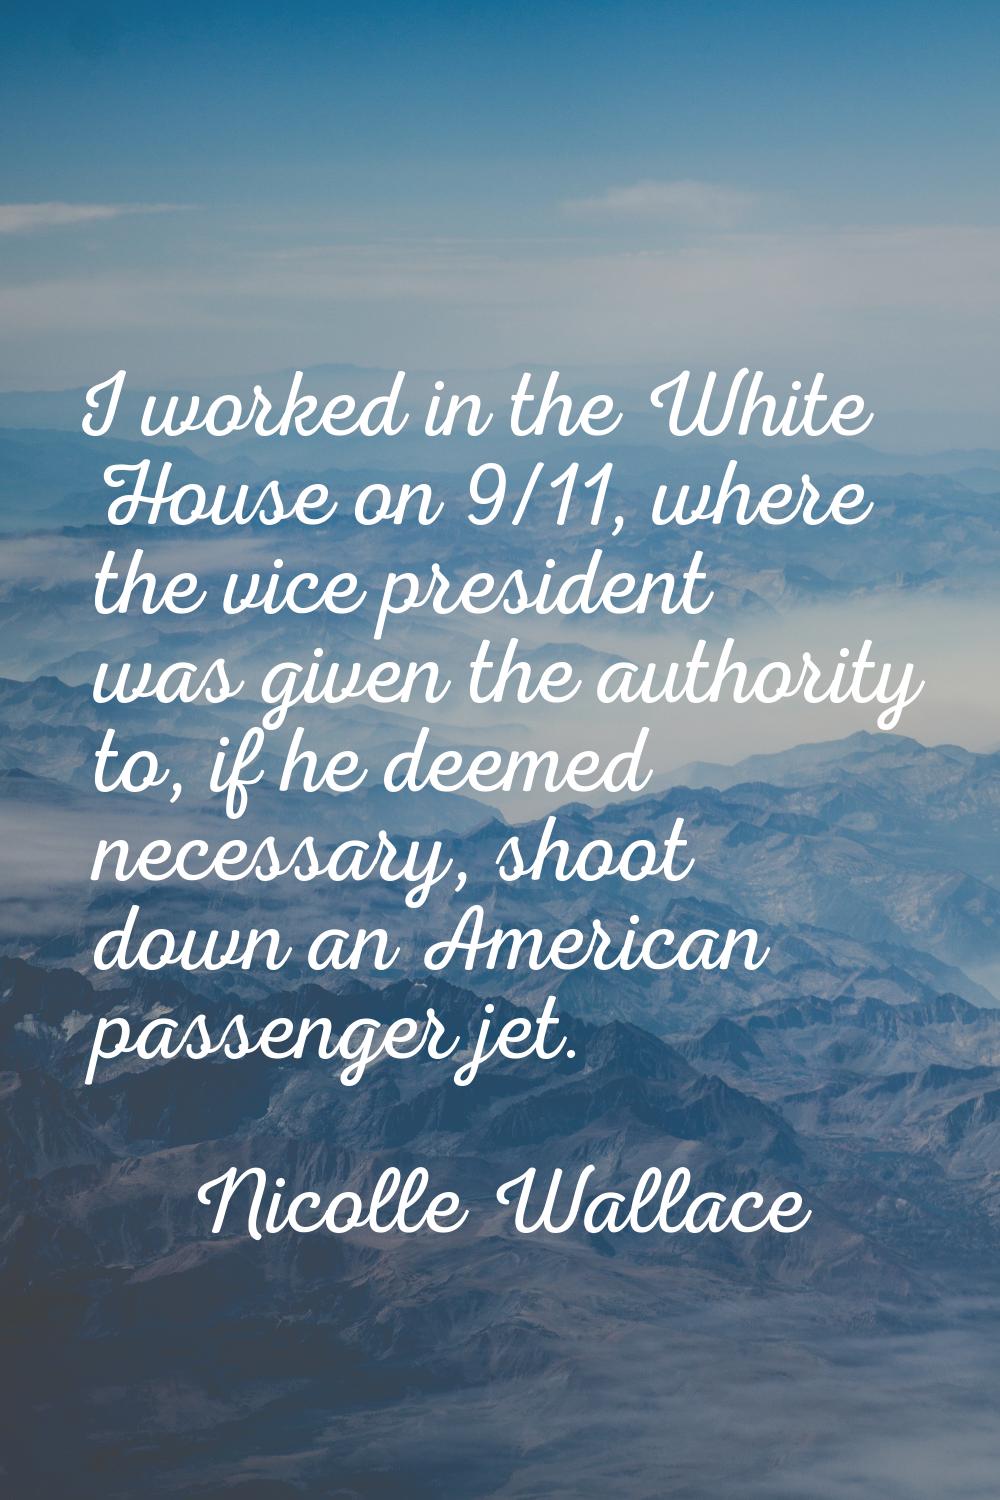 I worked in the White House on 9/11, where the vice president was given the authority to, if he dee